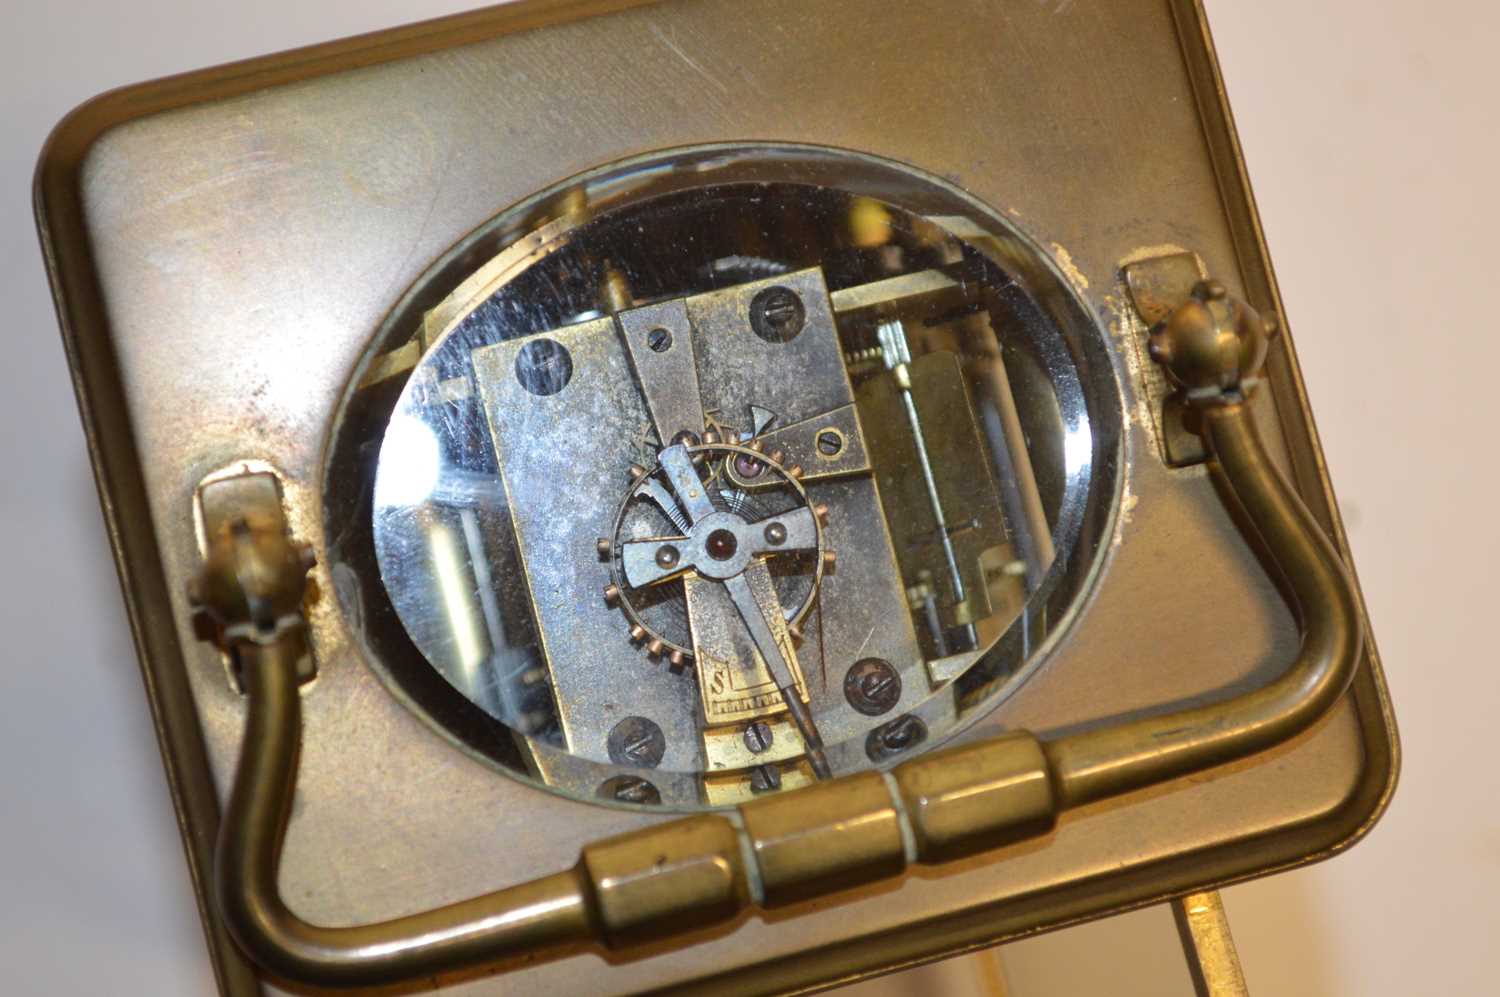 Late 19th century French Carriage Clock - Image 3 of 4